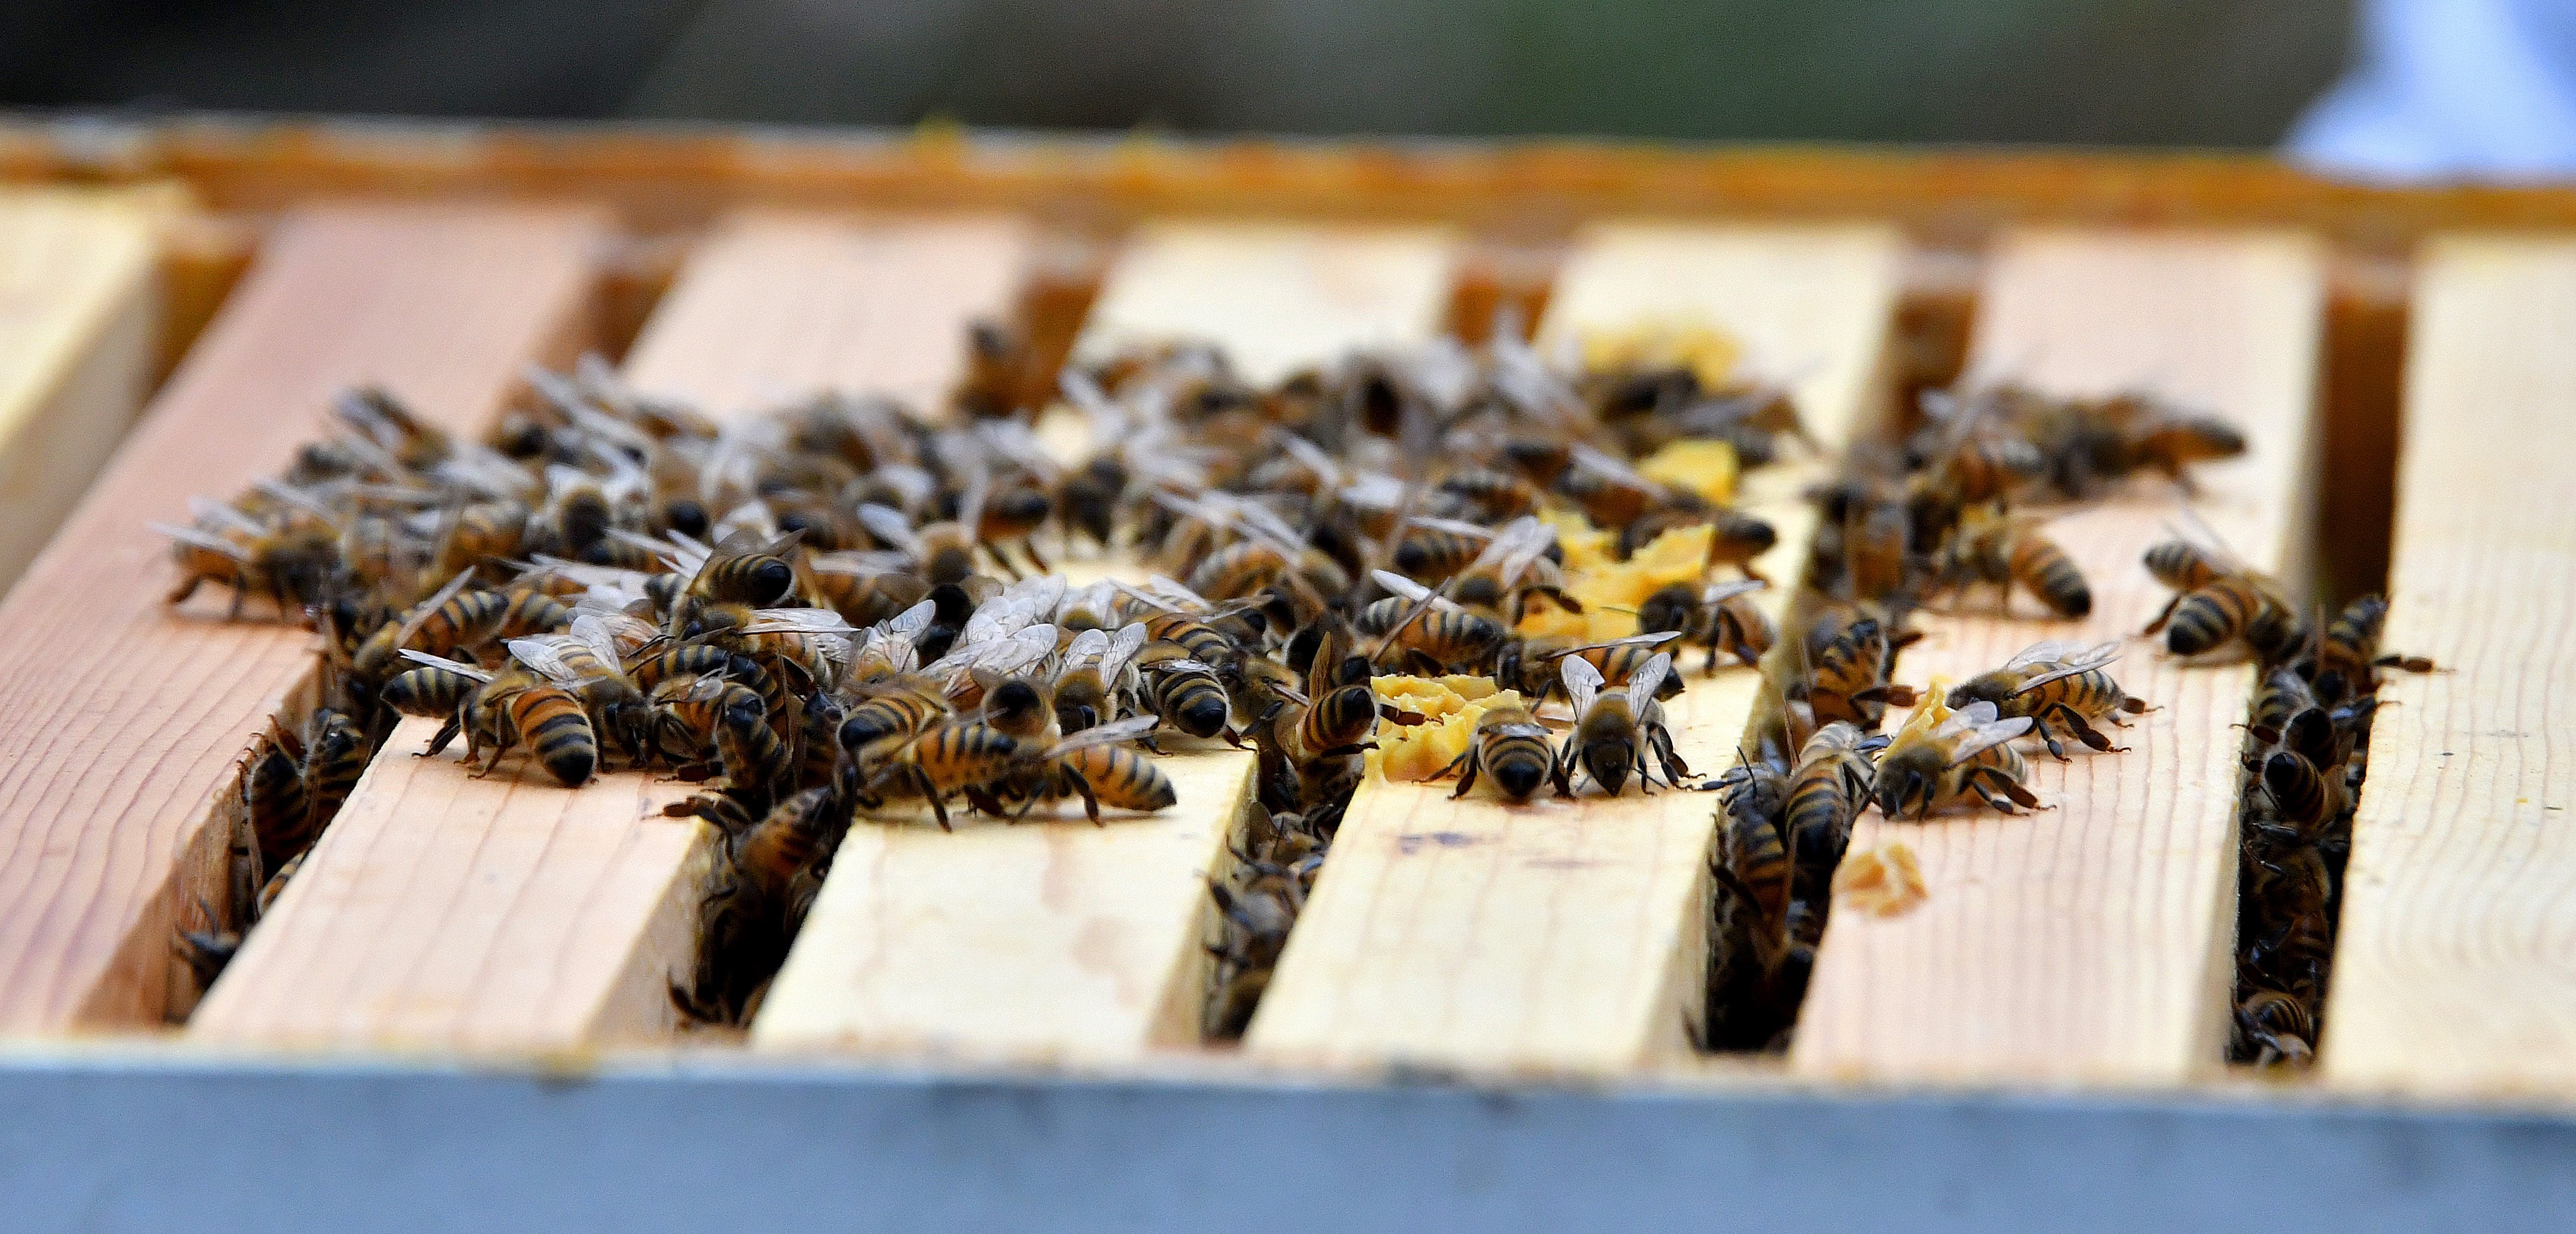 Honey bees cluster over a box of frames exposed in a hive. When the weather turns cold, the bees gather in a "ball" to stay warm.